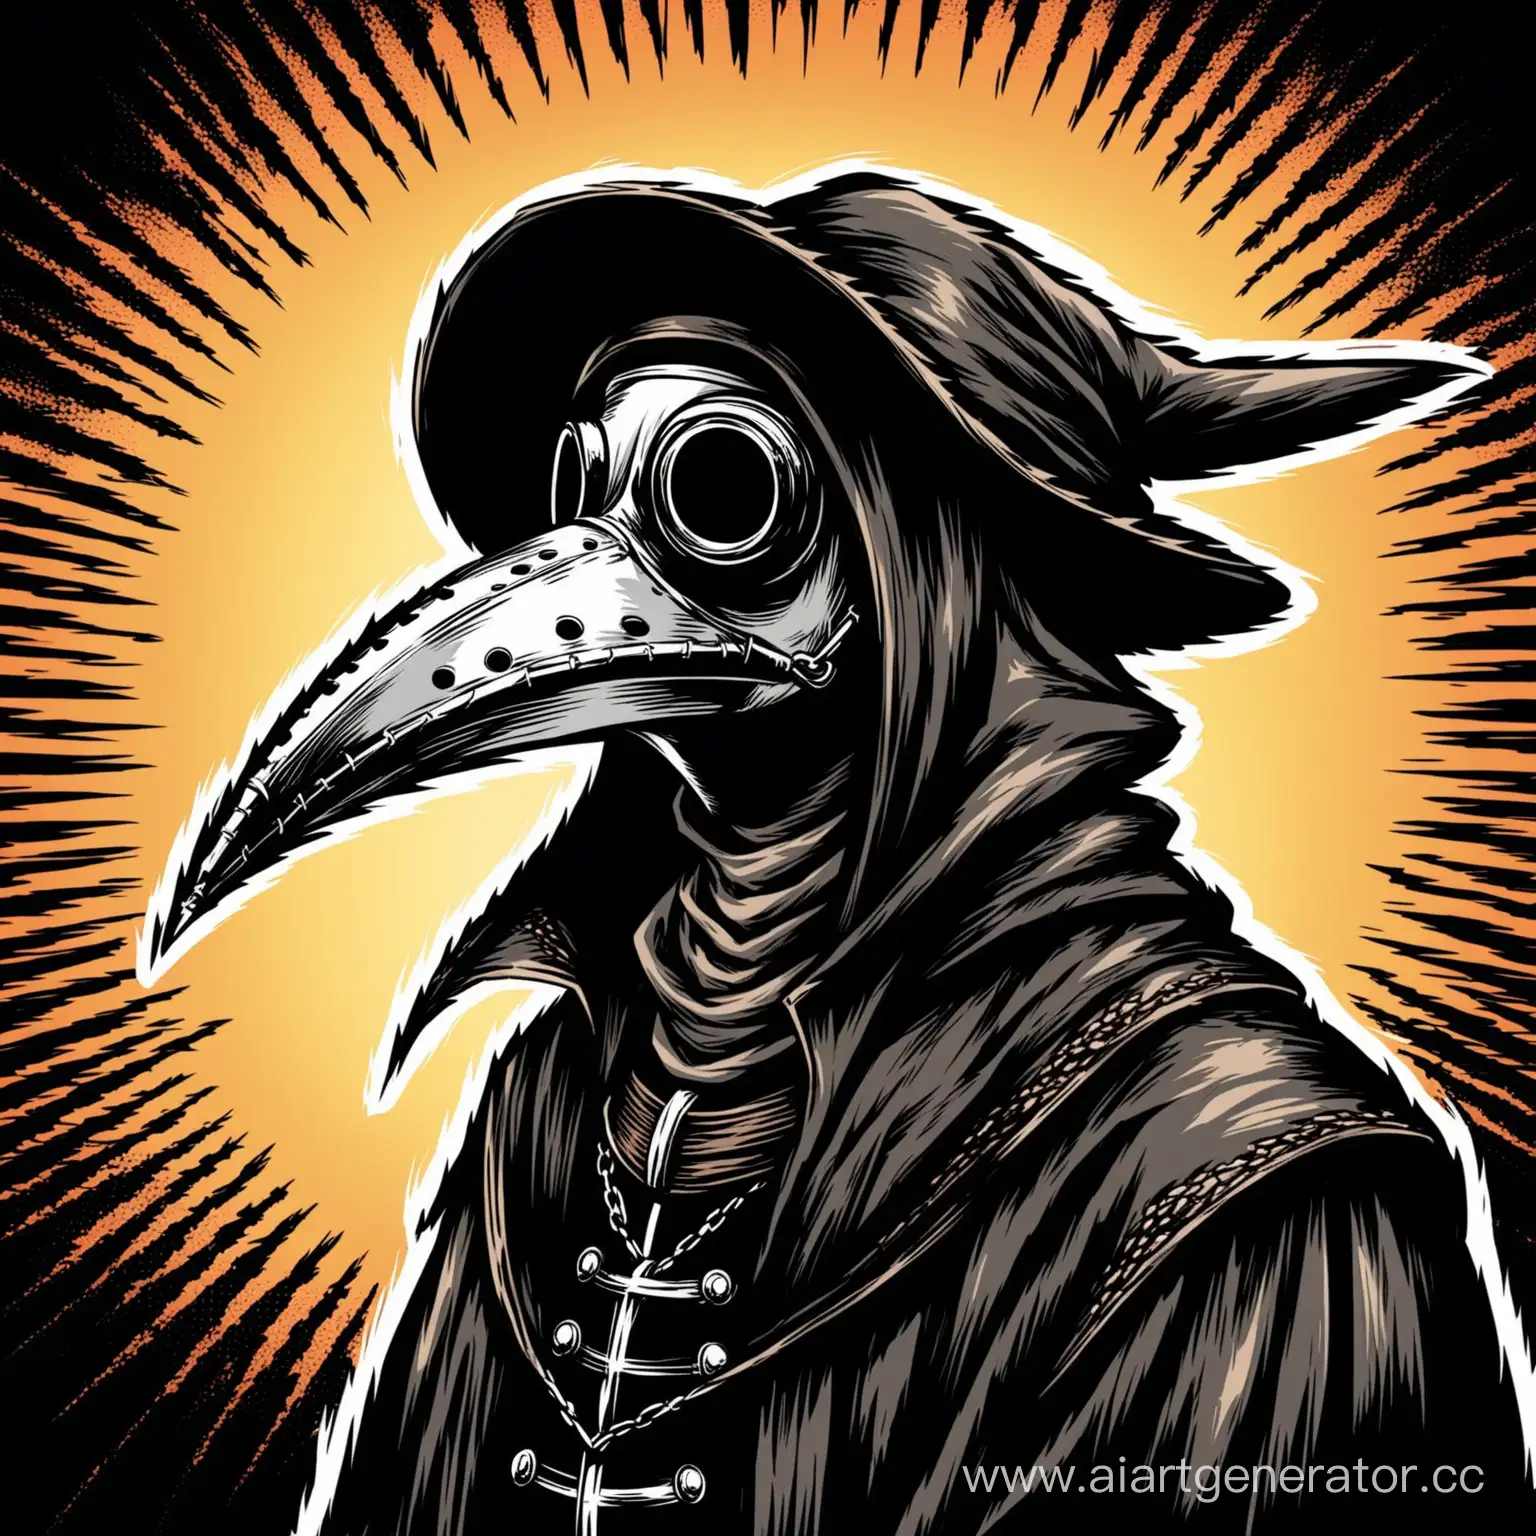 Comic-Style-Illustration-of-a-Plague-Doctor-Mask